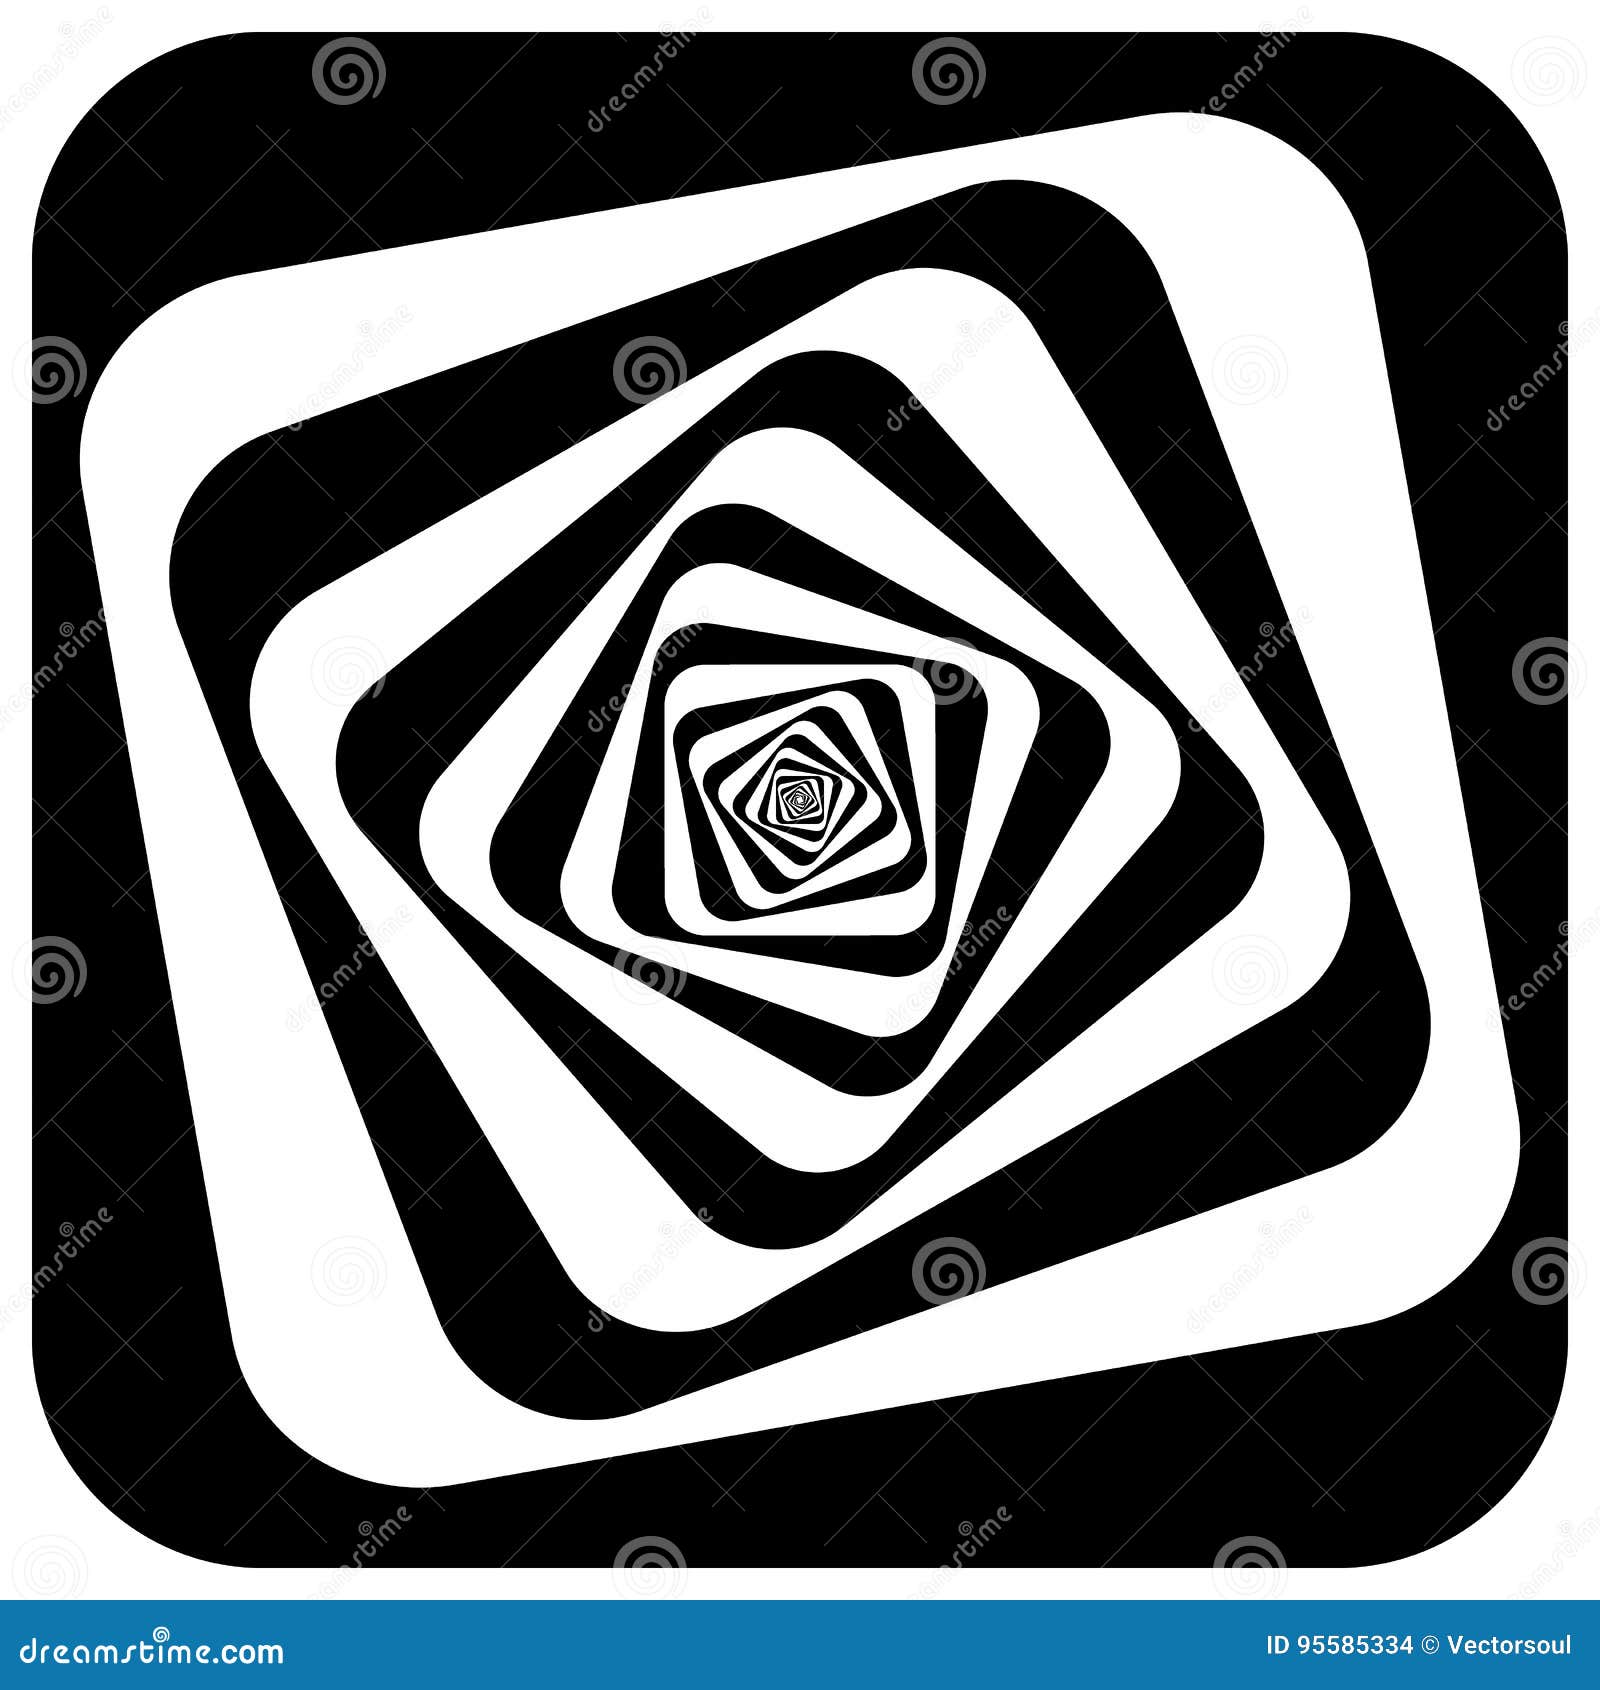 abstract geometric  with inward rotating squares. overlap